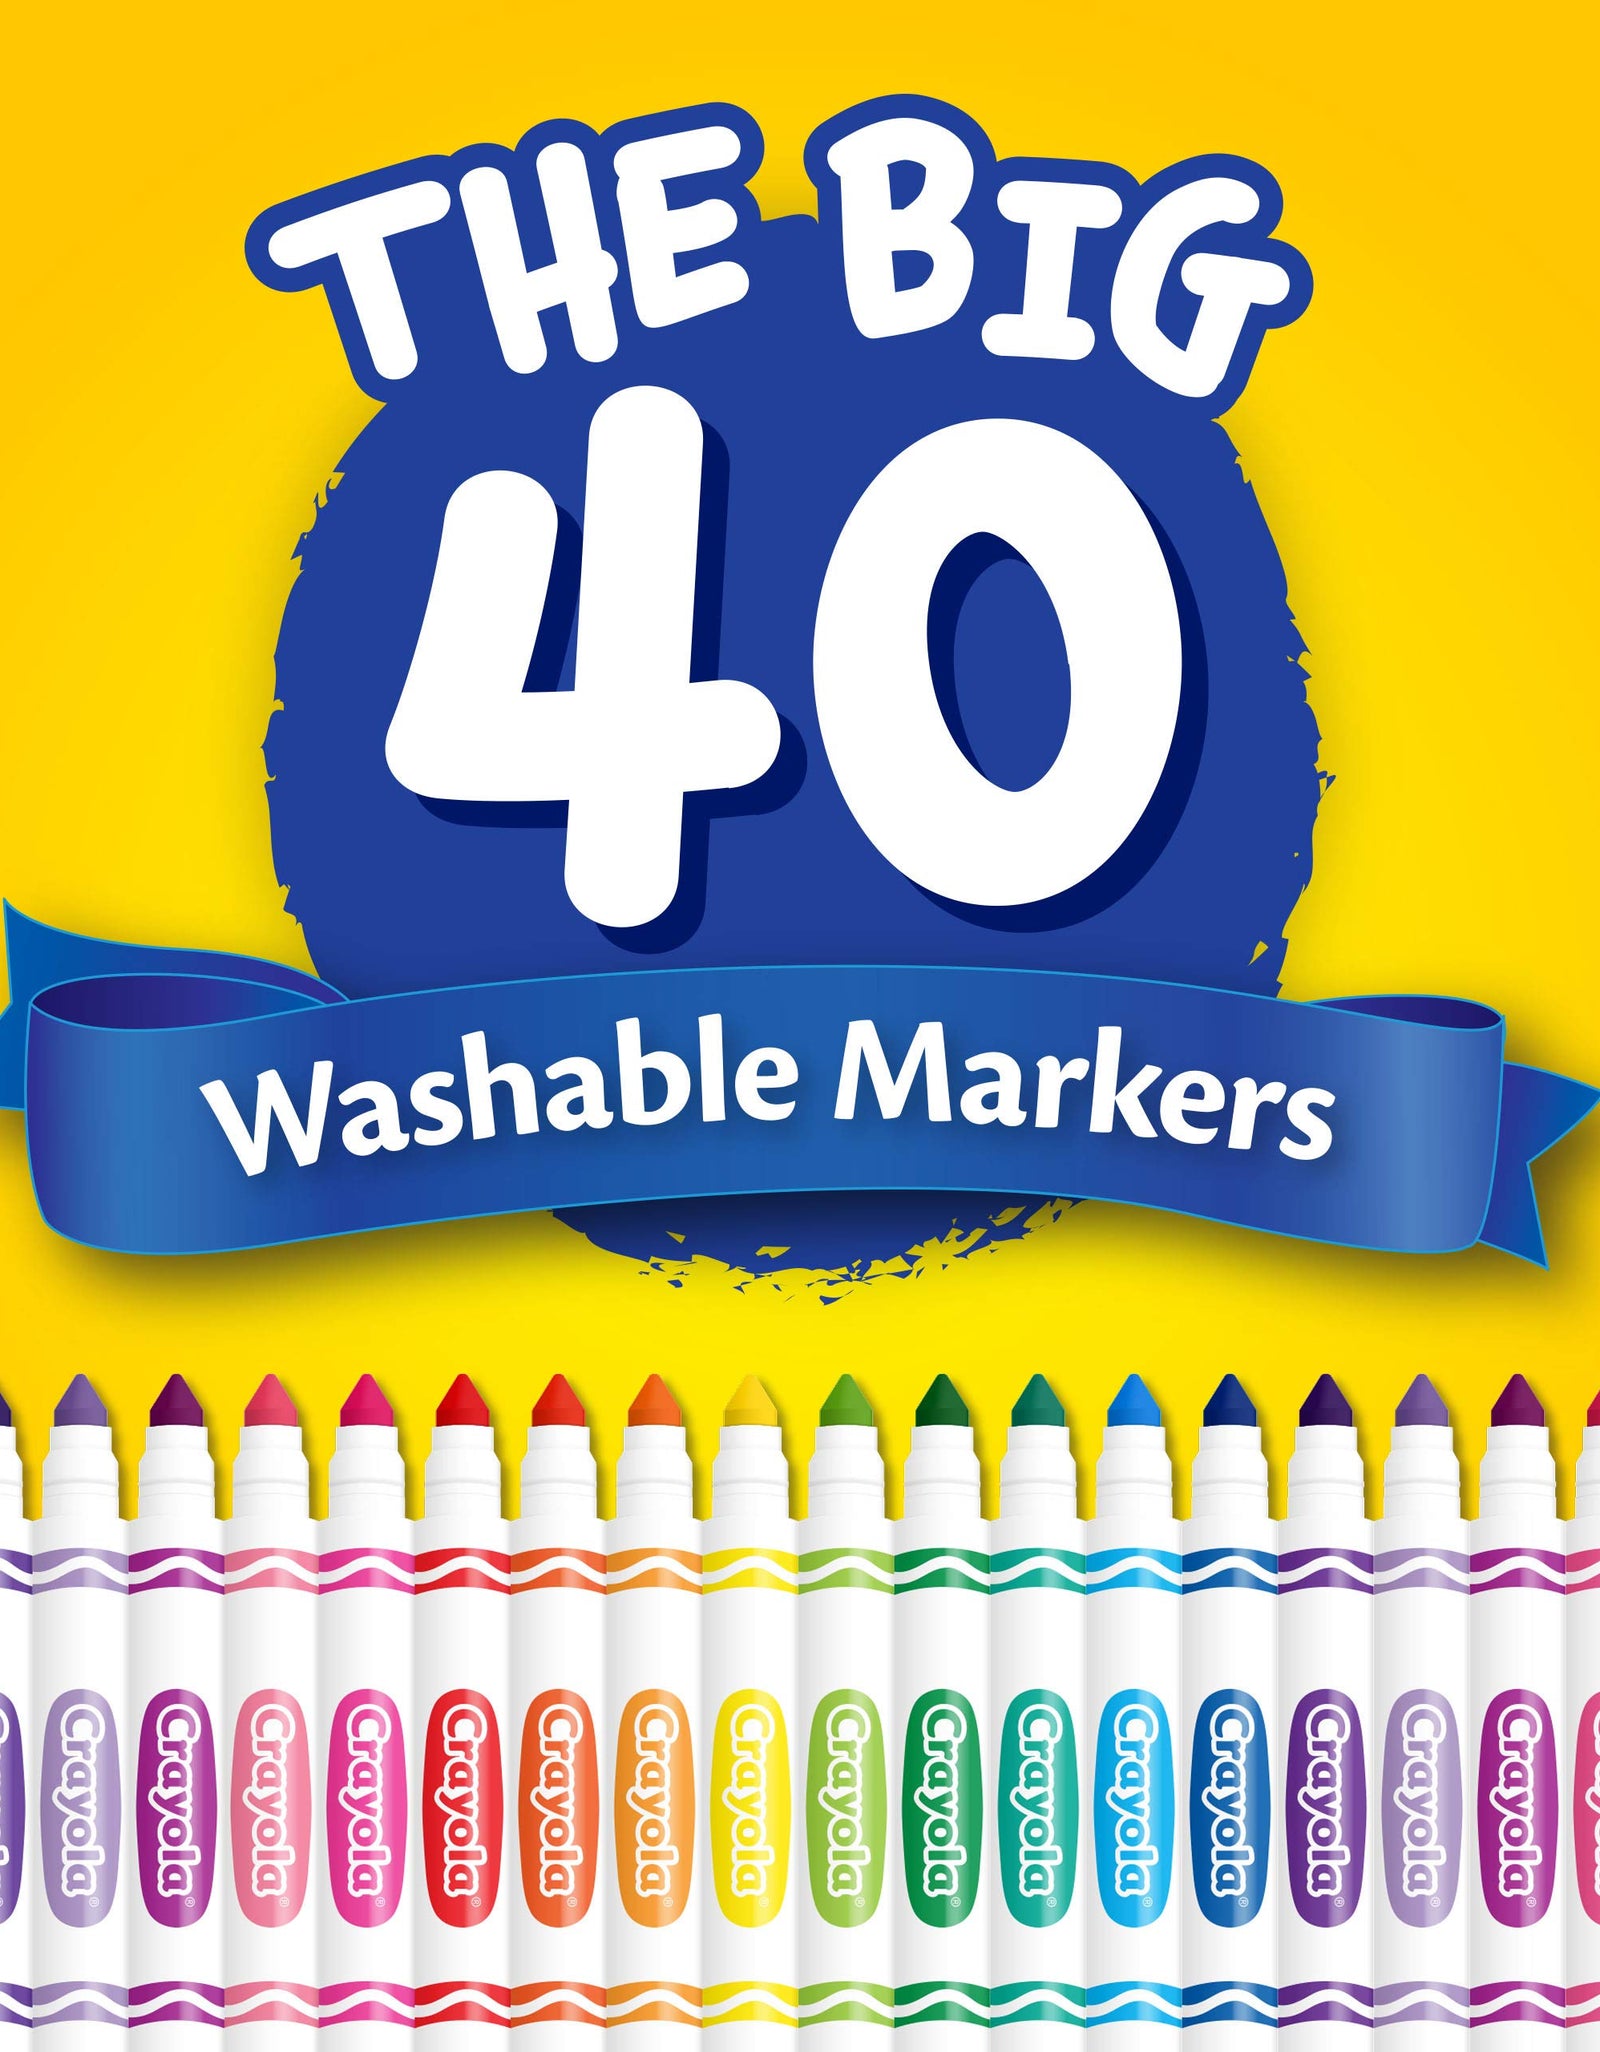 Crayola Ultra Clean Washable Markers, Kids Indoor Activities At Home, Broad Line, 40 Classic Colors